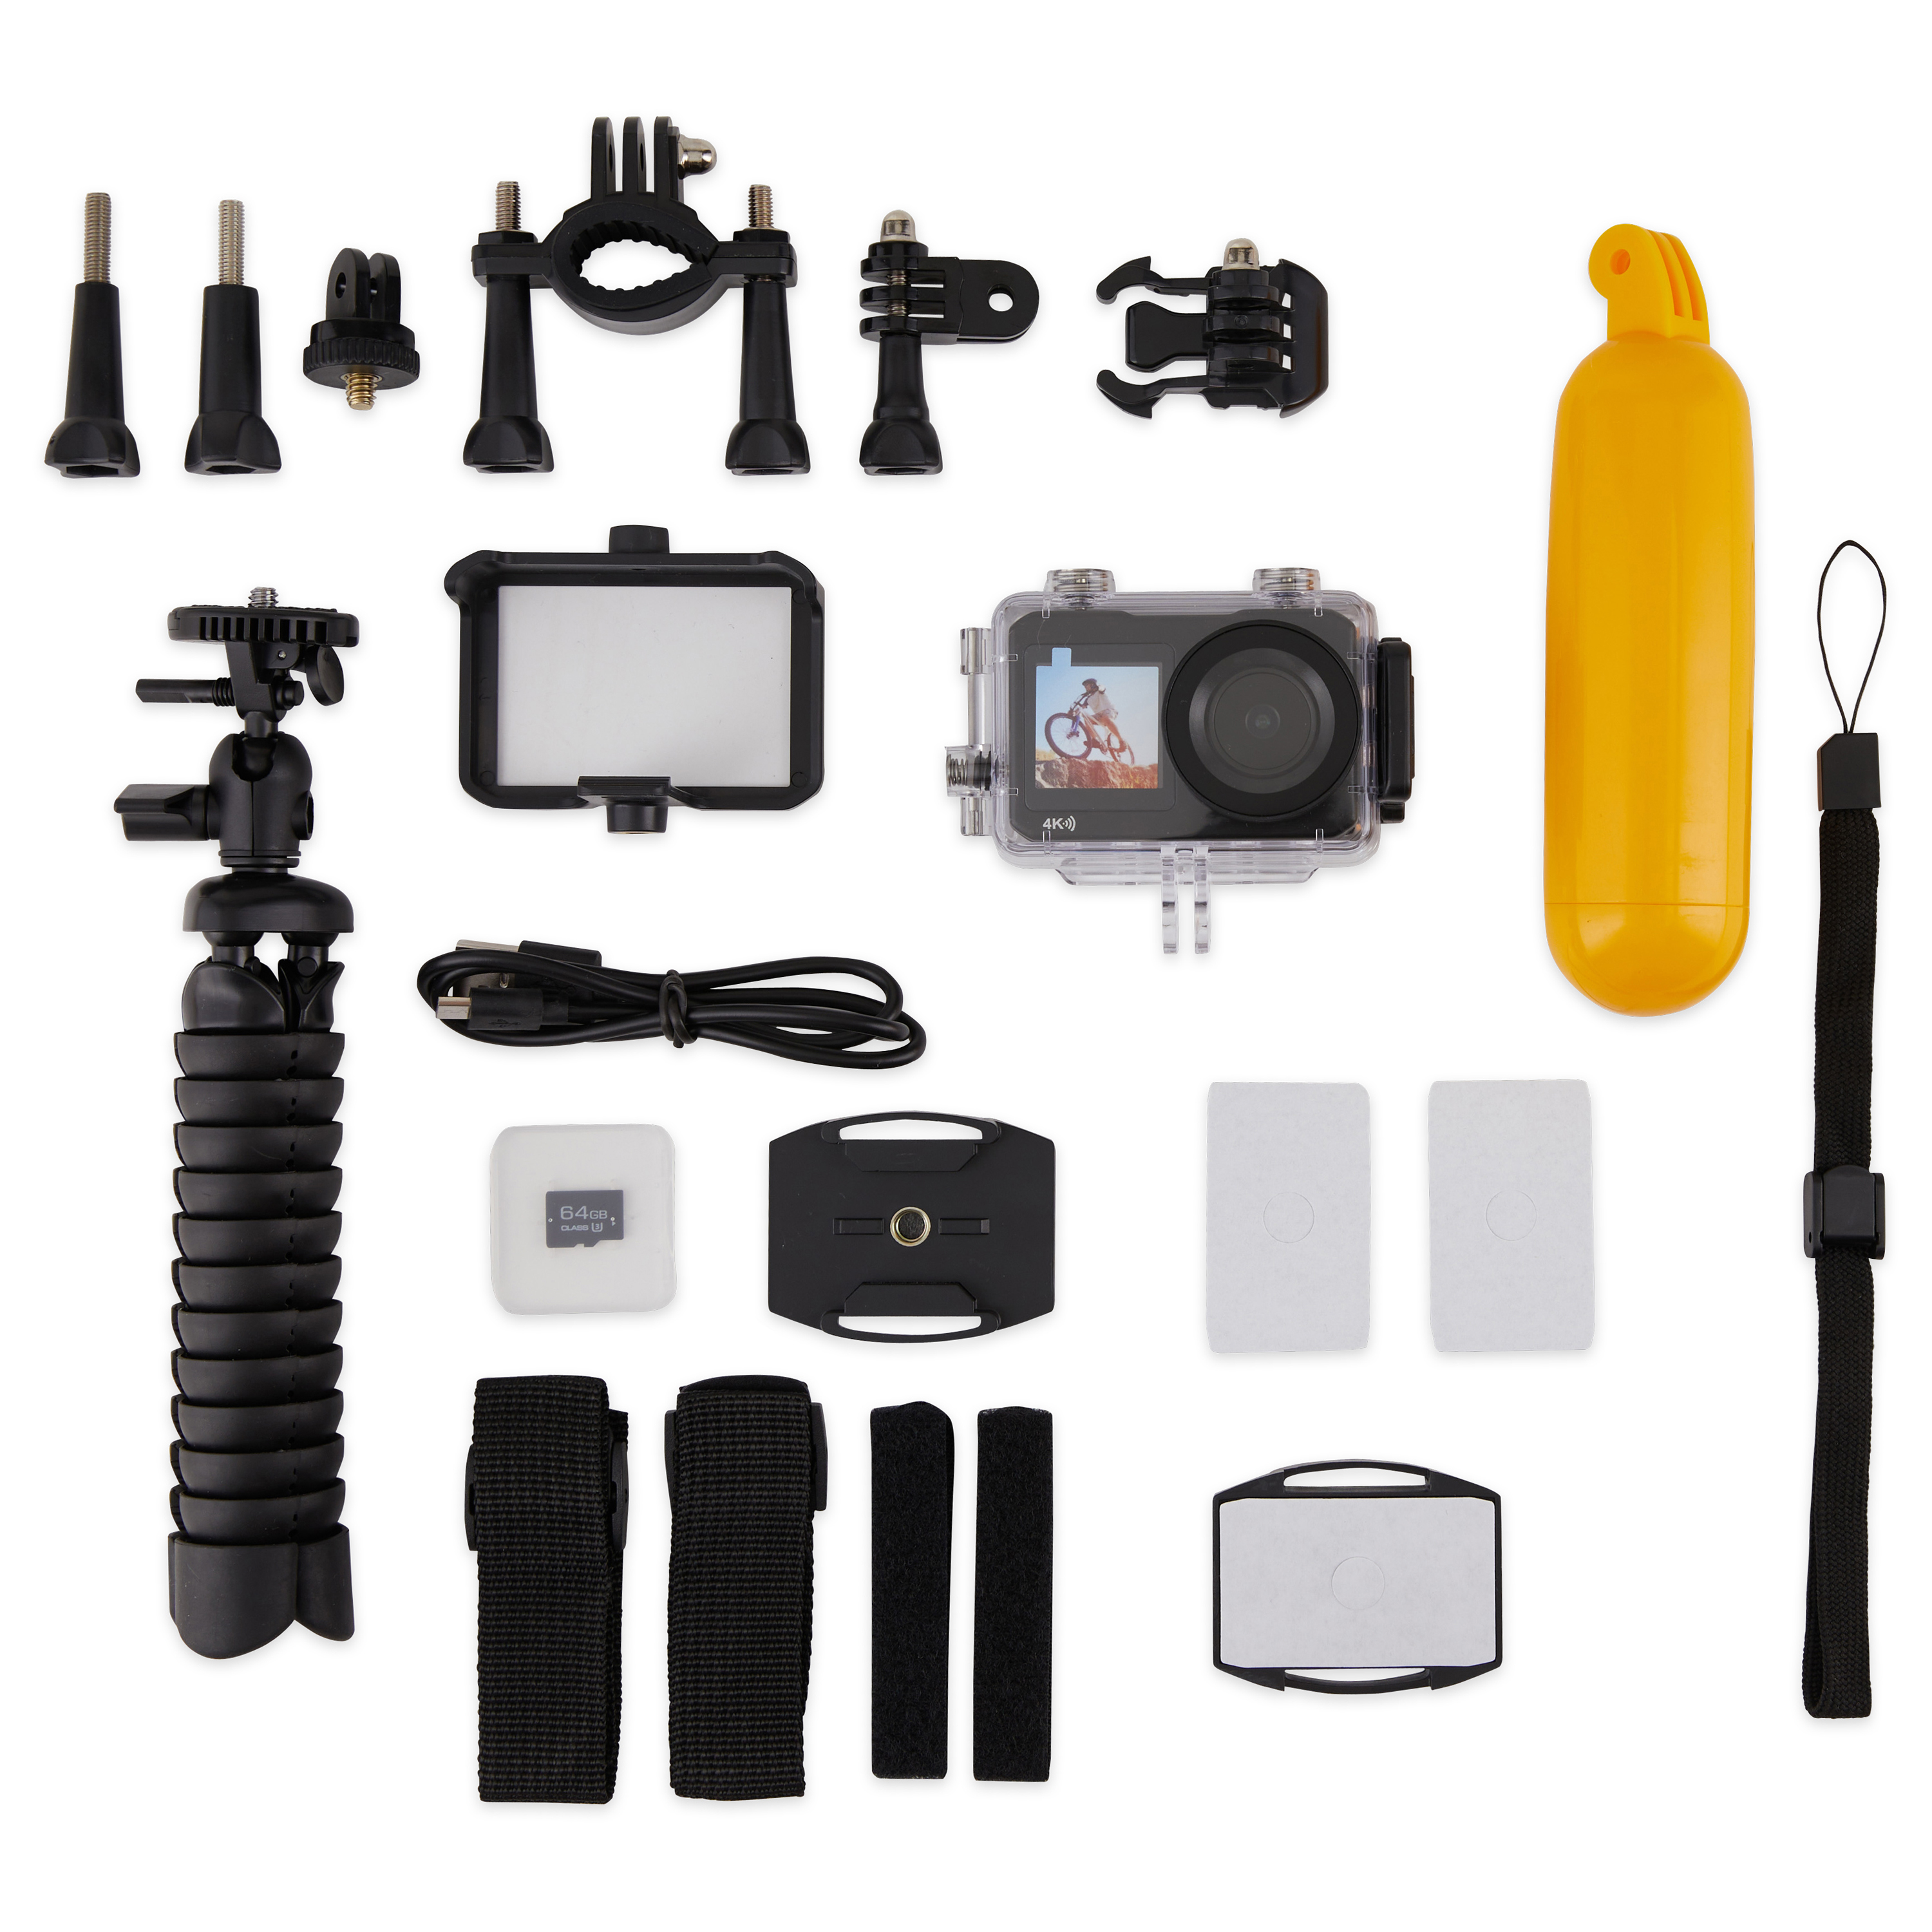 Vivitar 4K Ultra HD Action Camera Kit, Dual Screen with Wifi, Bonus Battery, Includes SD Card, Floating Handle, Tripod, Mounts - image 2 of 15